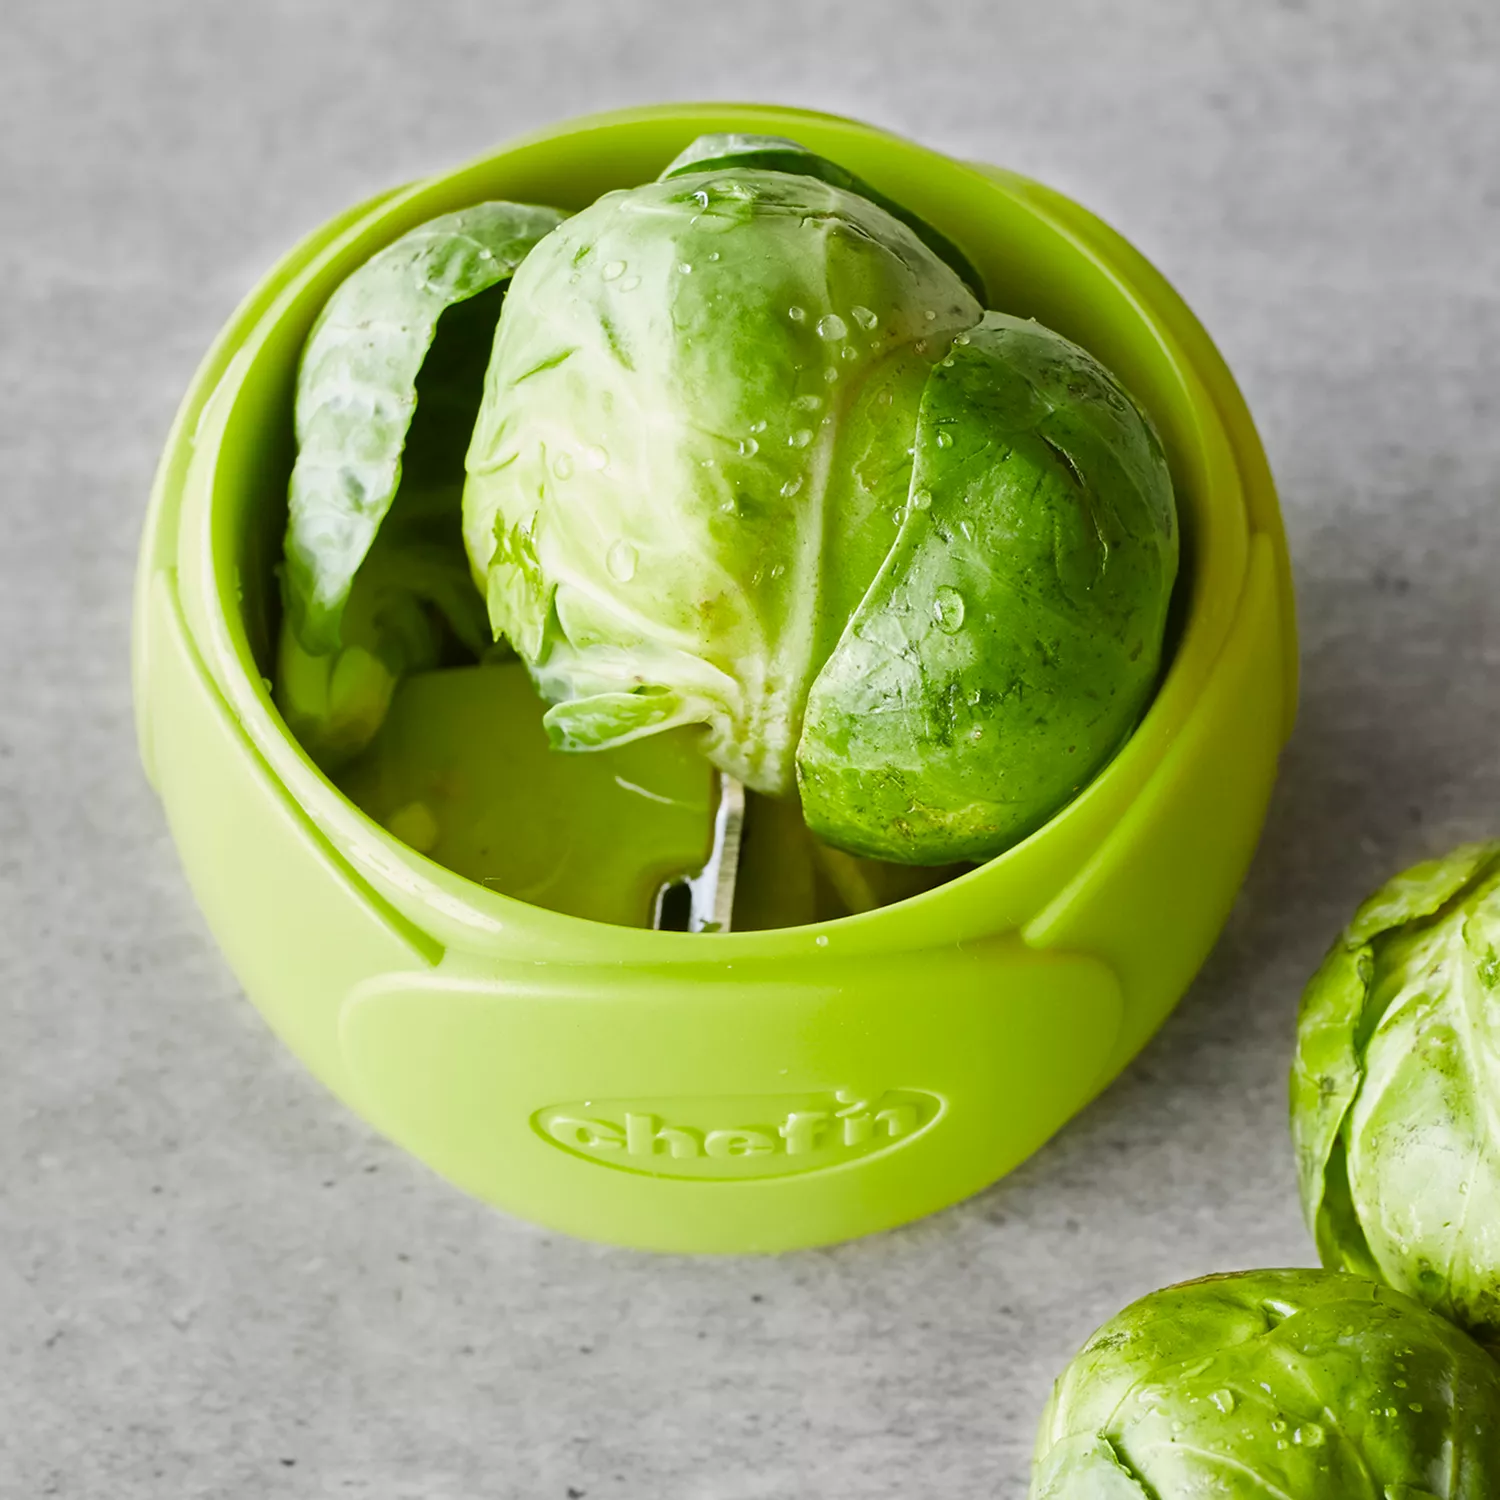 Chef'n Twist'n Sprout Brussels Sprout Tool, Sur La Table